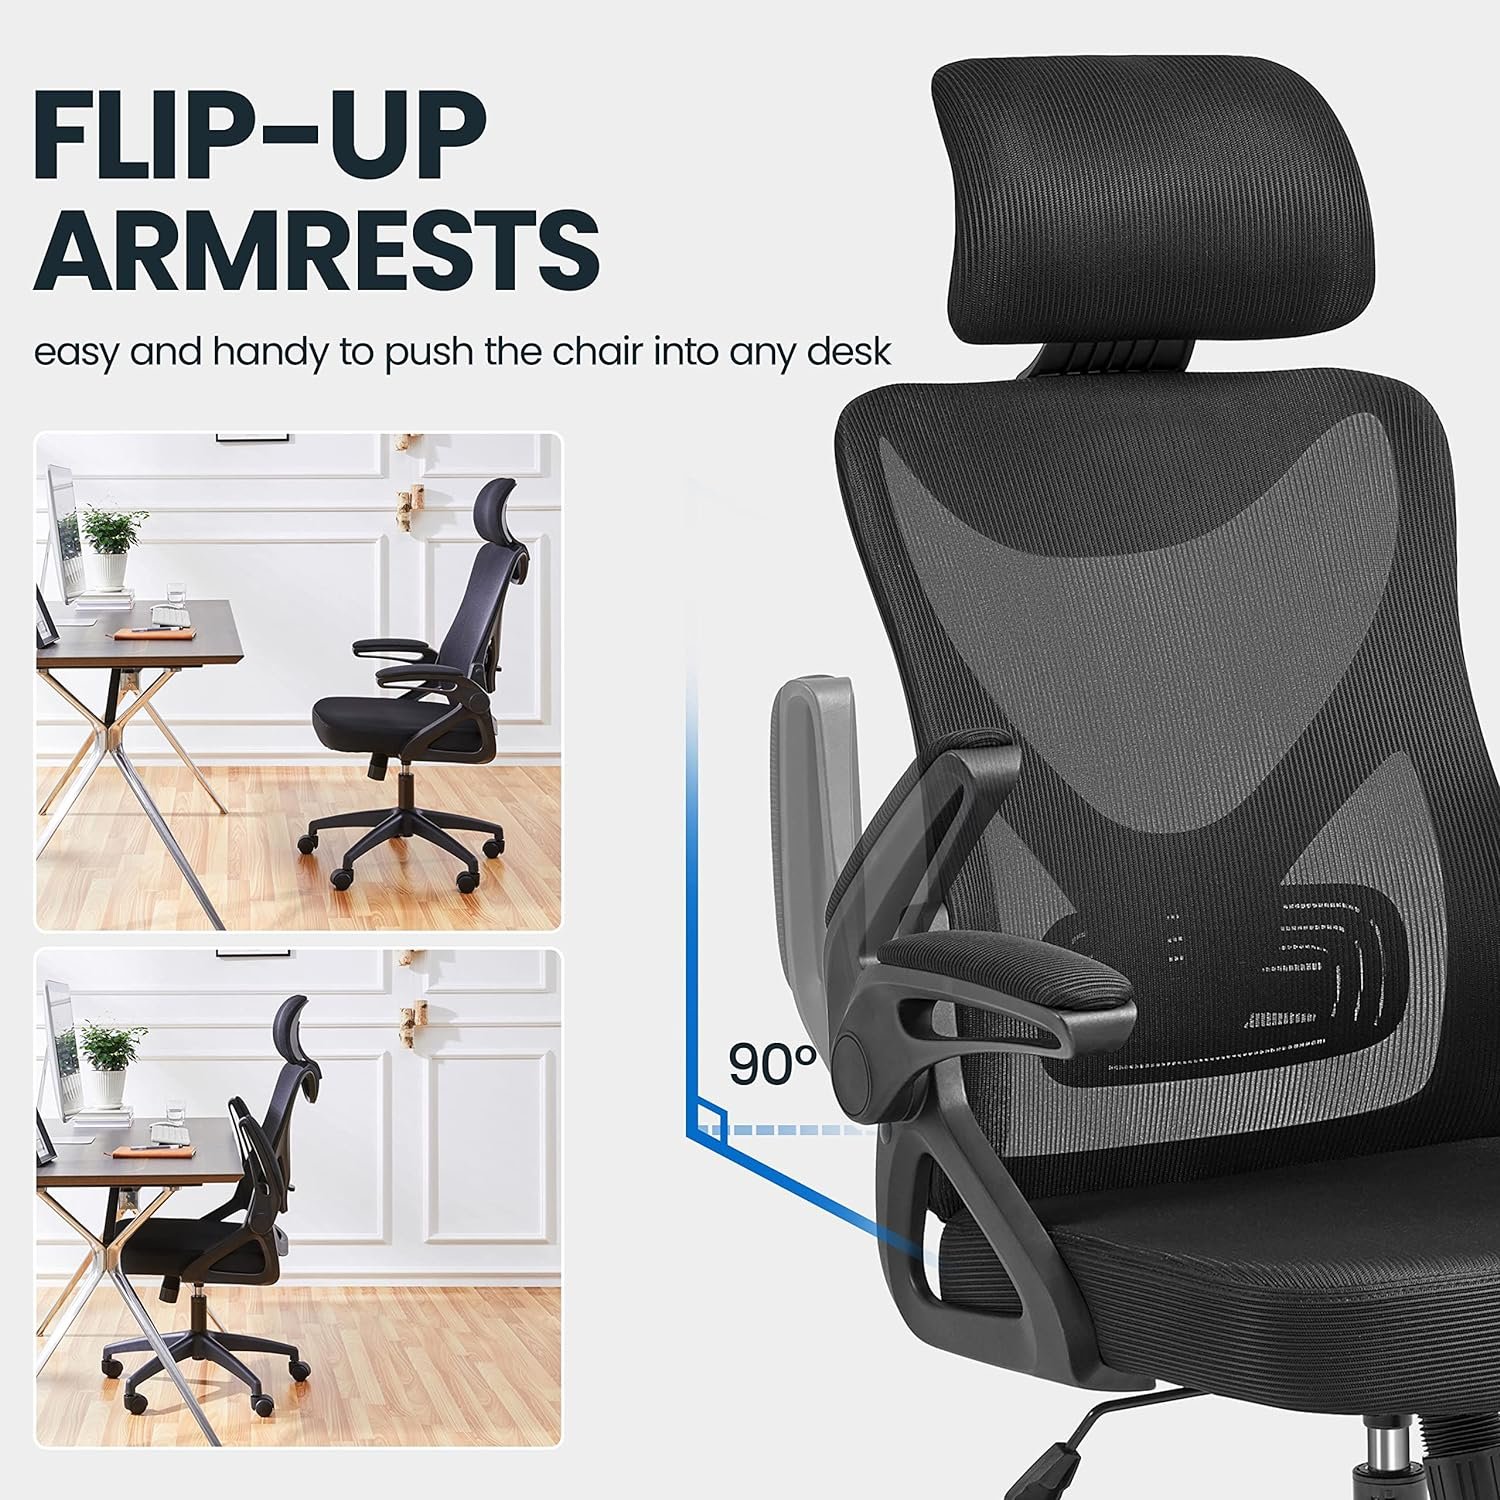 Yaheetech Ergonomic Office Chair, High Back Desk Chair with with flip-up Armrests, Adjustable Padded Headrest Mesh Computer Chair with Lumbar Support for Home Office Meeting Room, Black